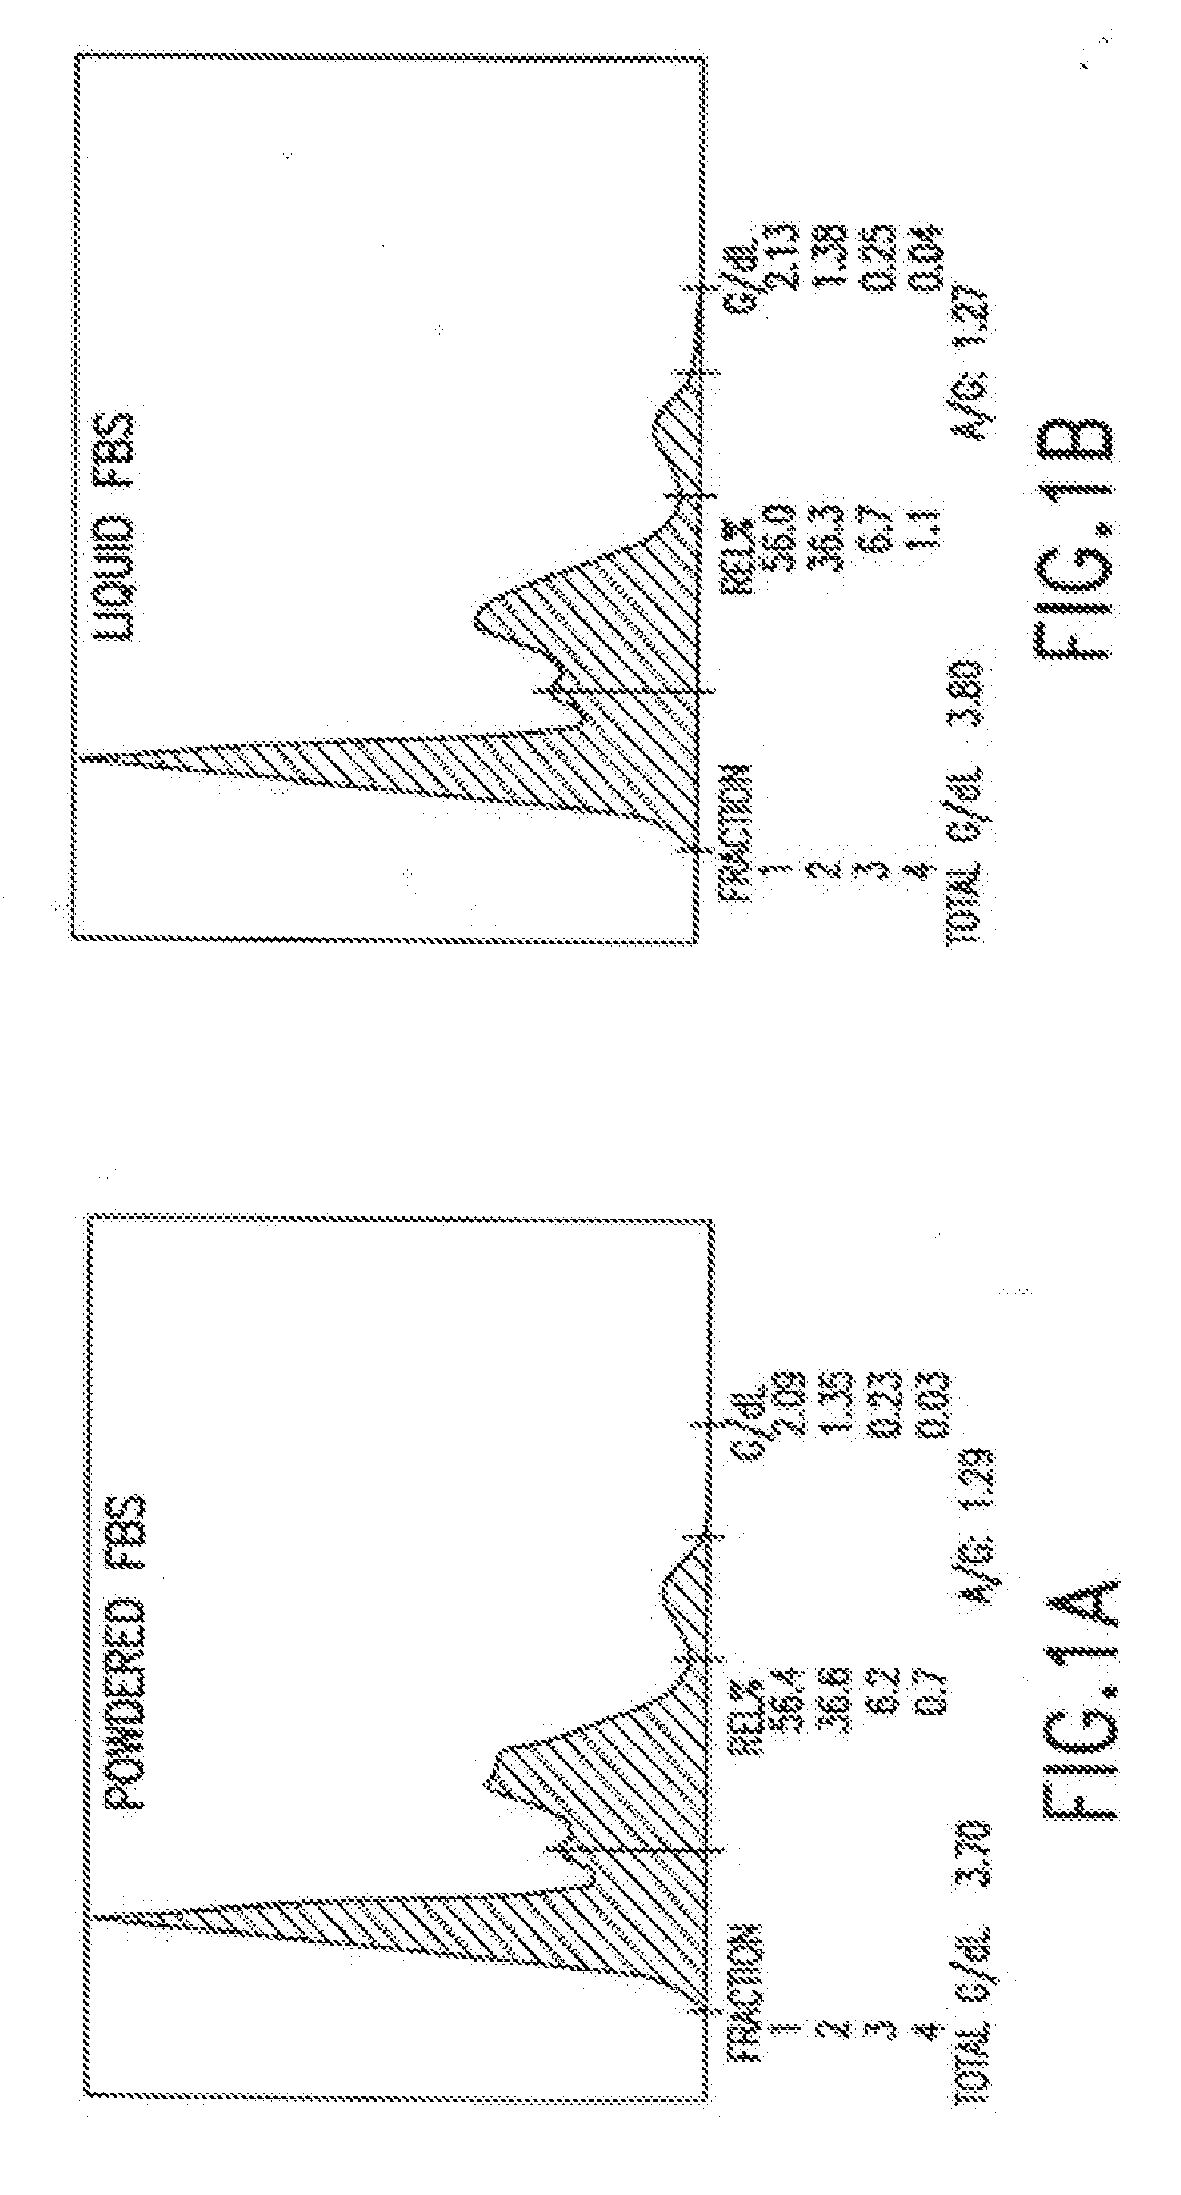 Dry powder cell culture products and methods of production thereof